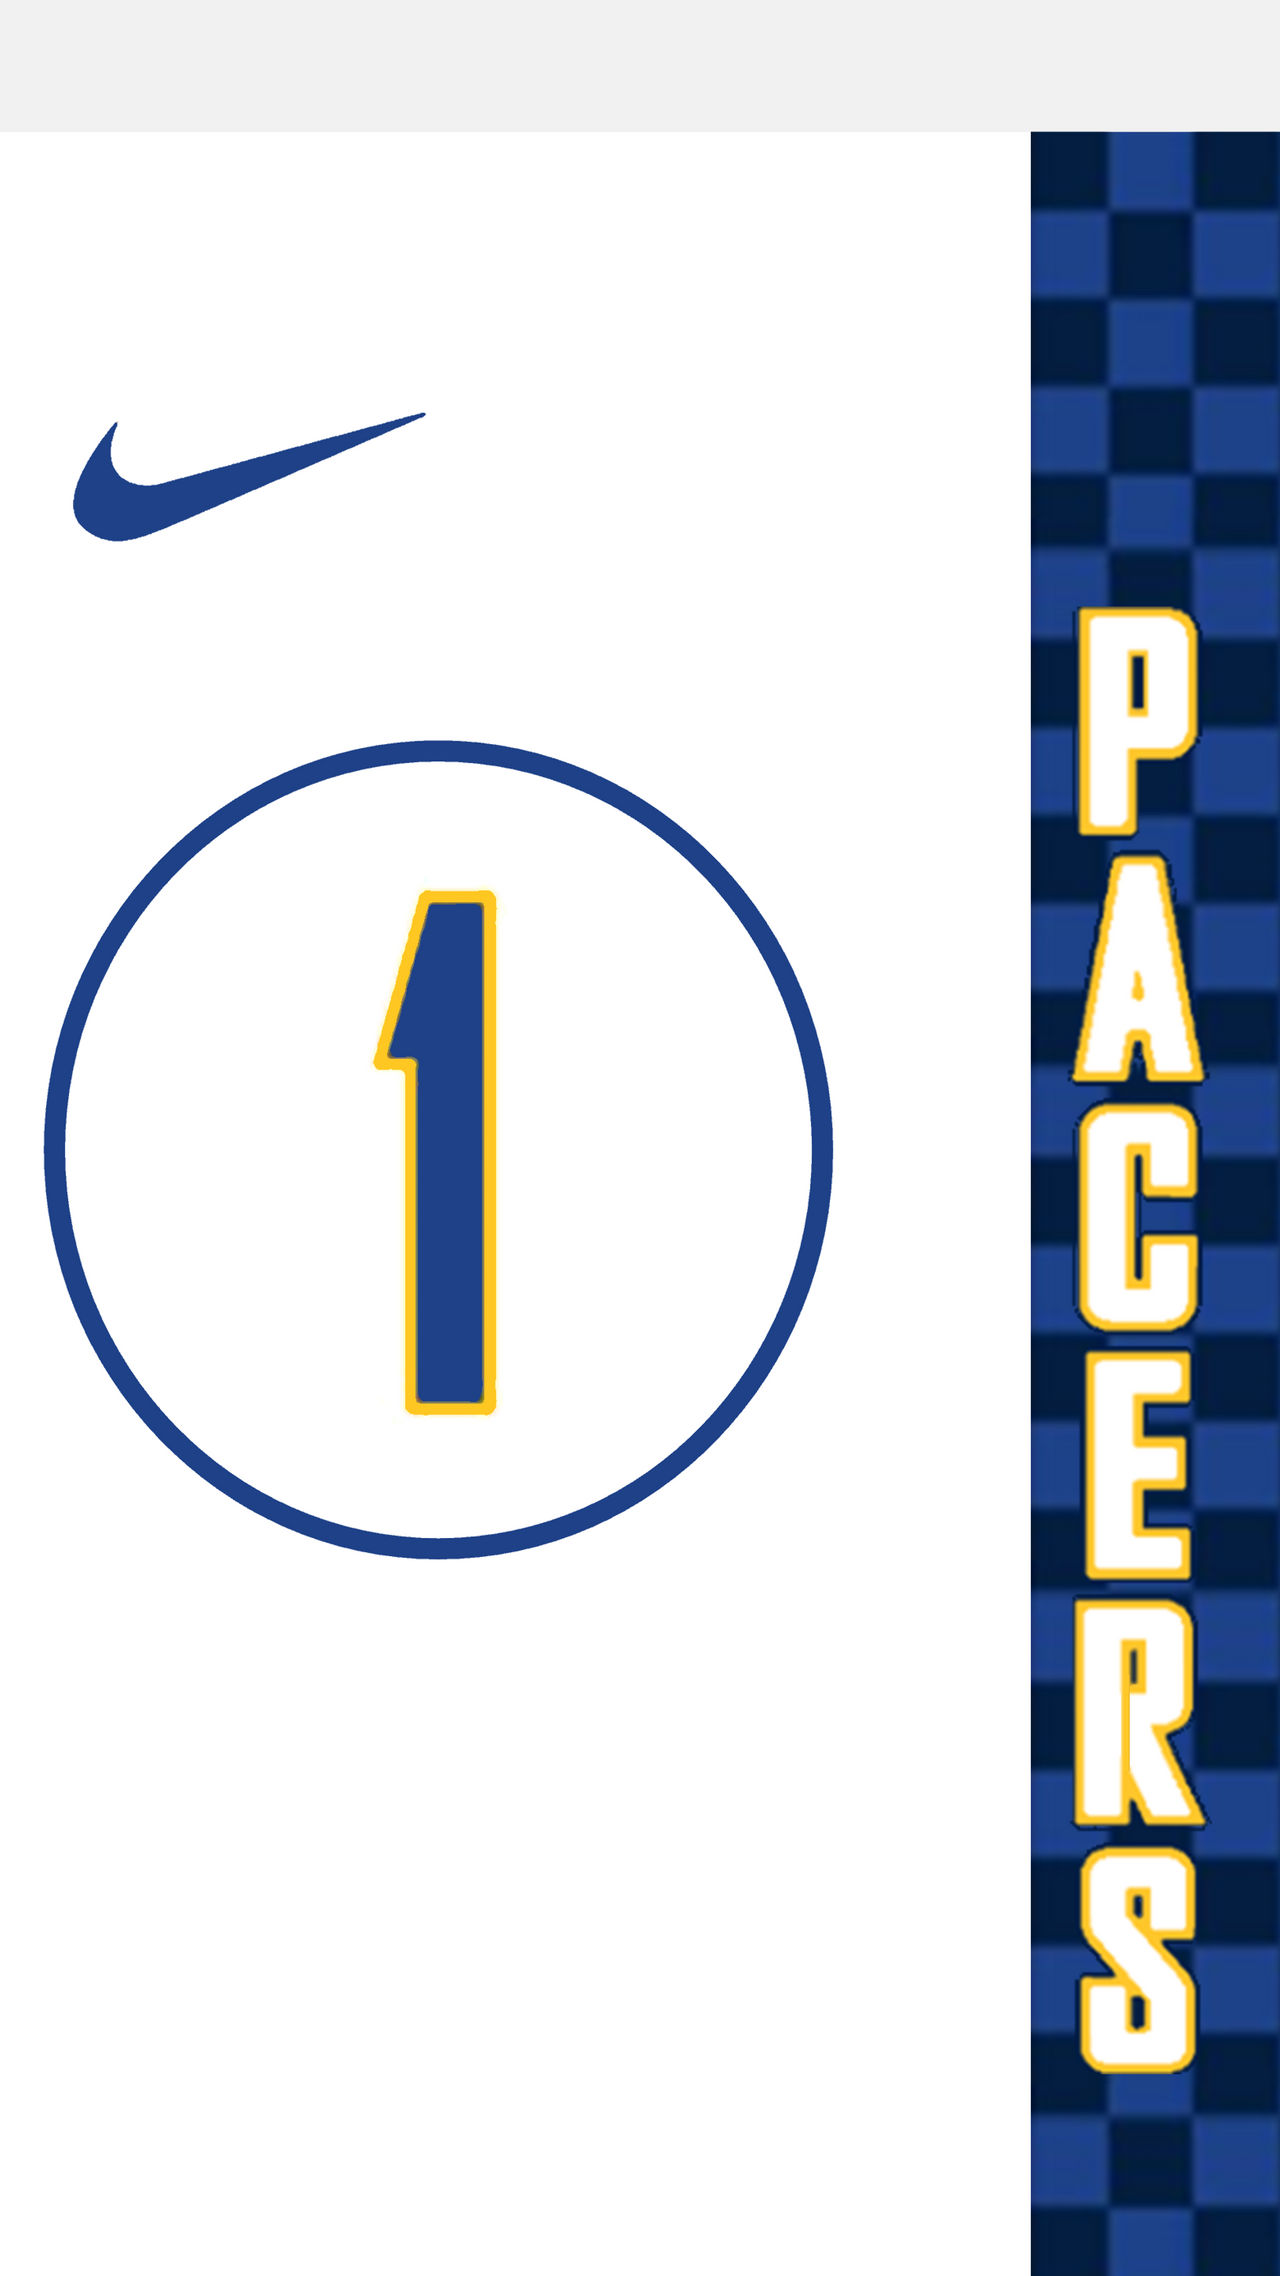 First Look: 2019-20 Pacers City Edition Uniforms Photo Gallery